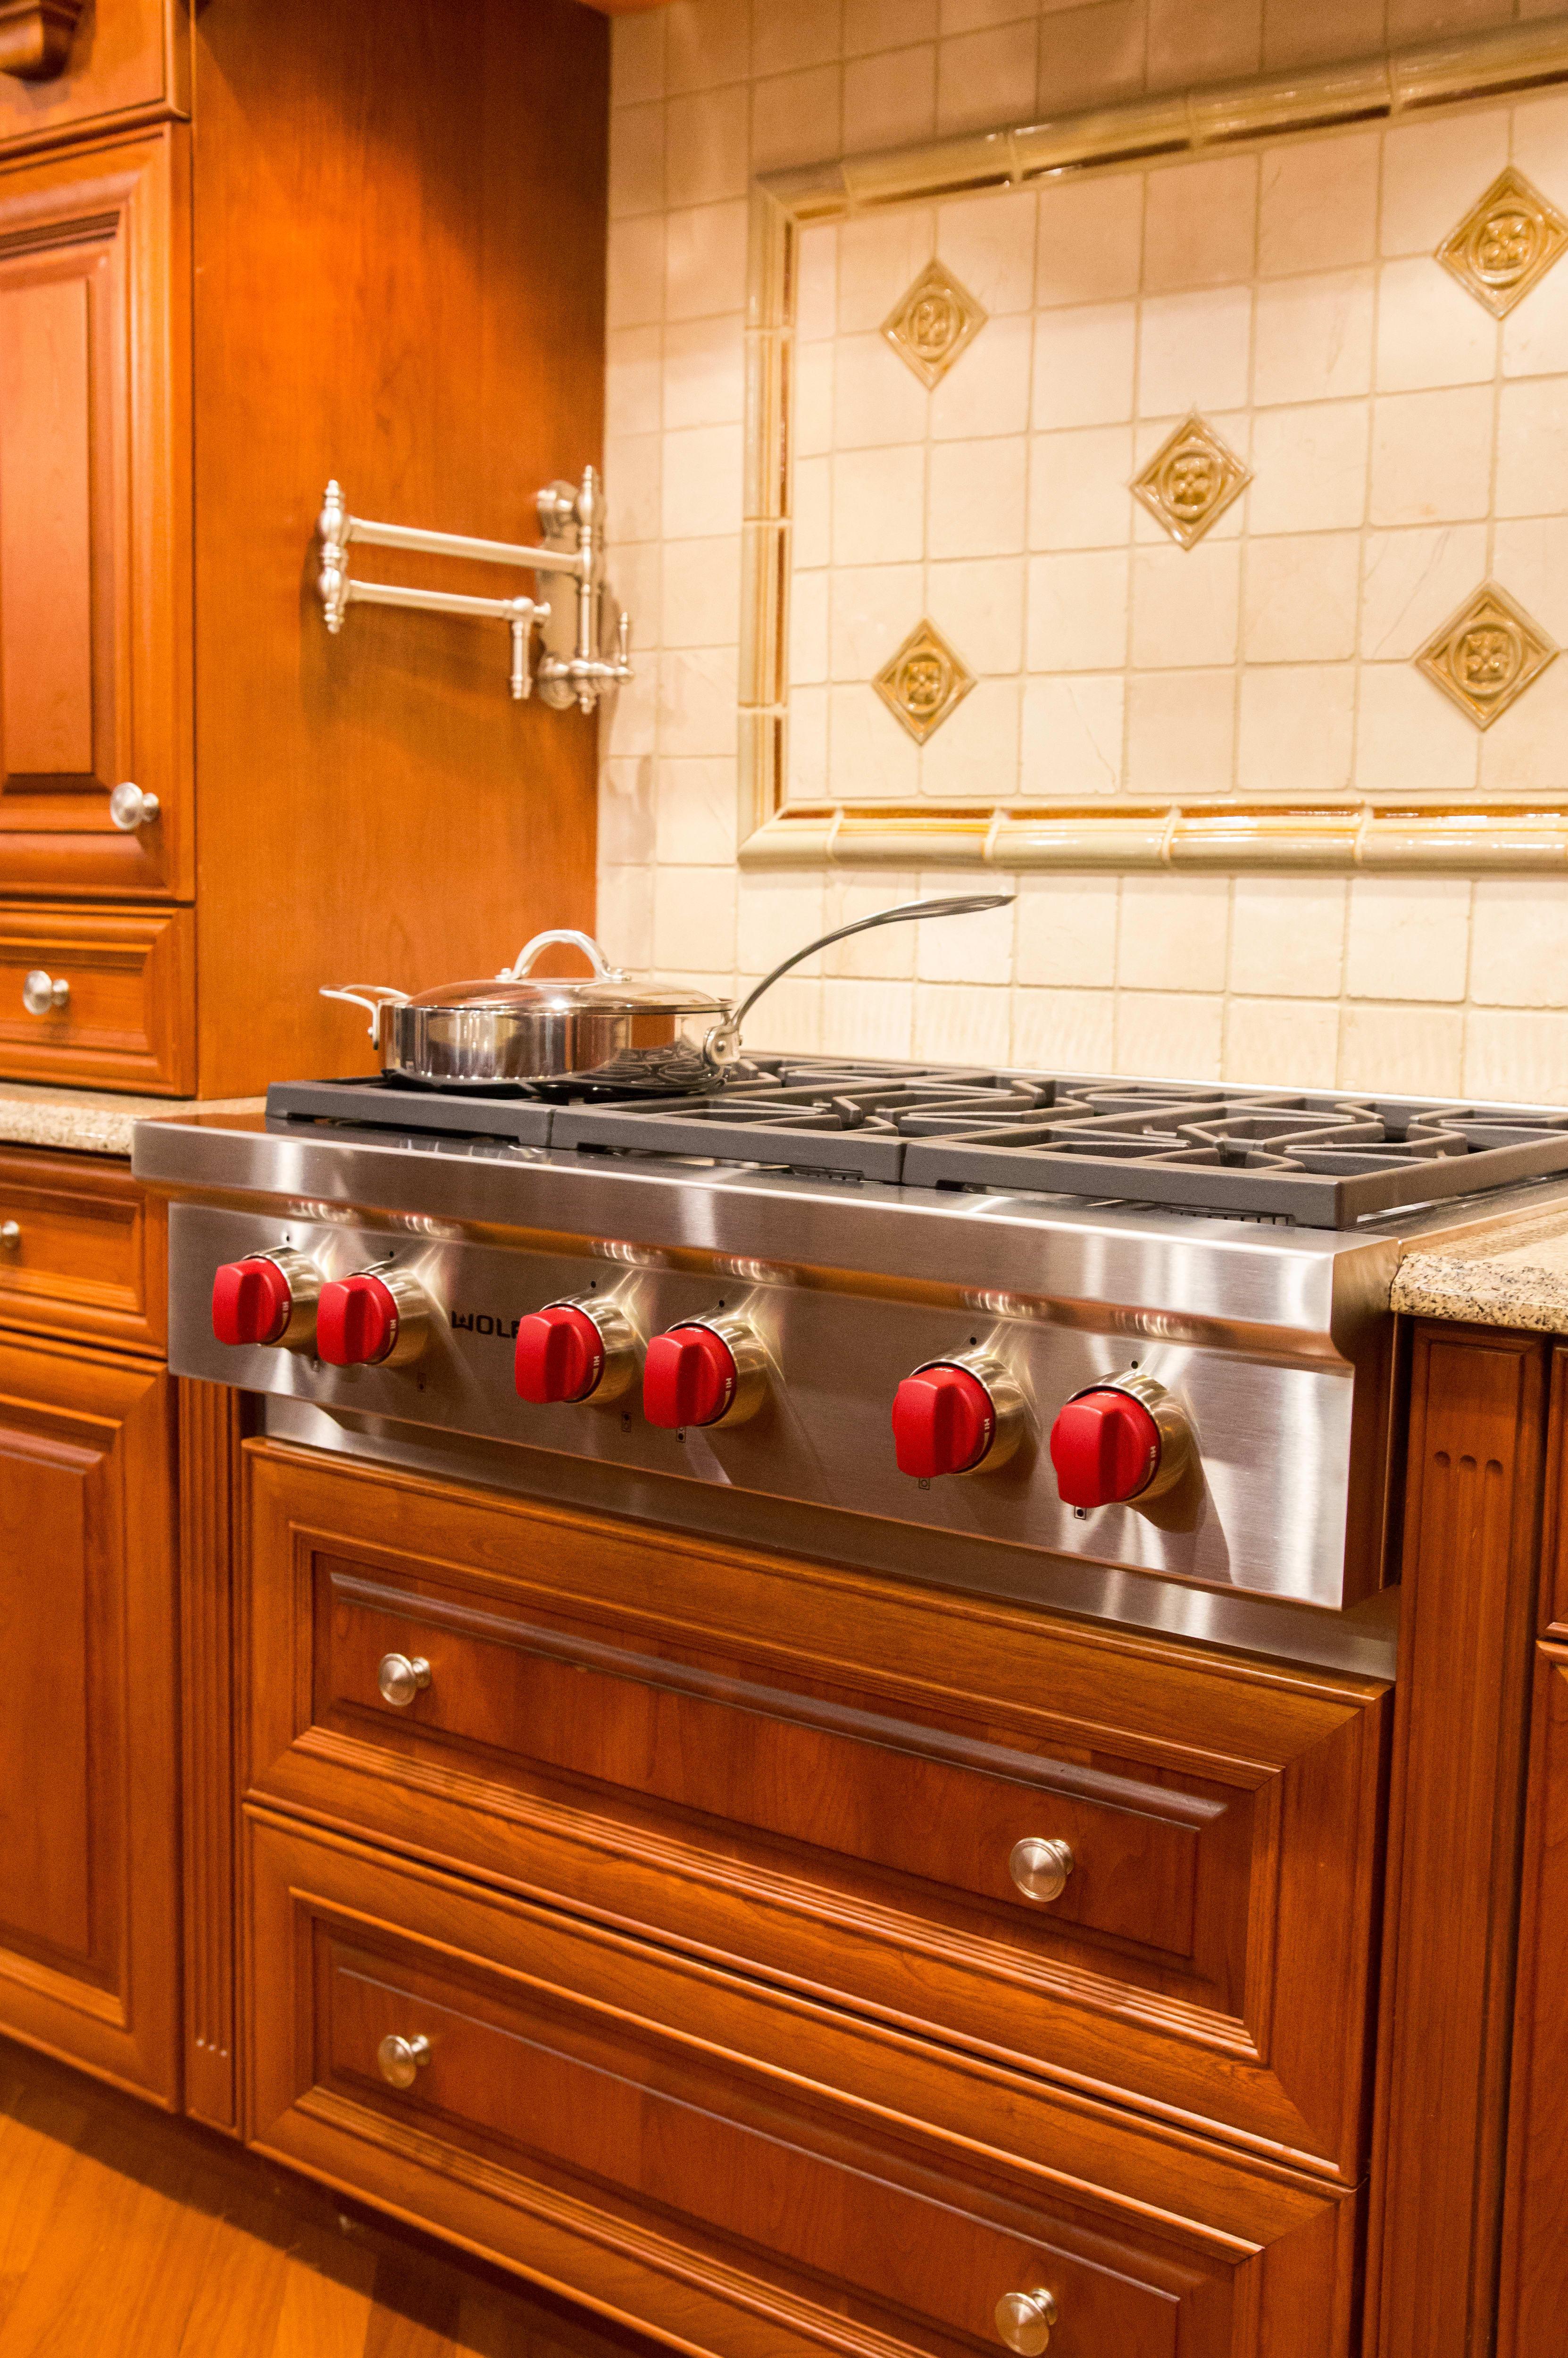 wolf-srt366-36-inch-gas-rangetop-review-reviewed-luxury-home